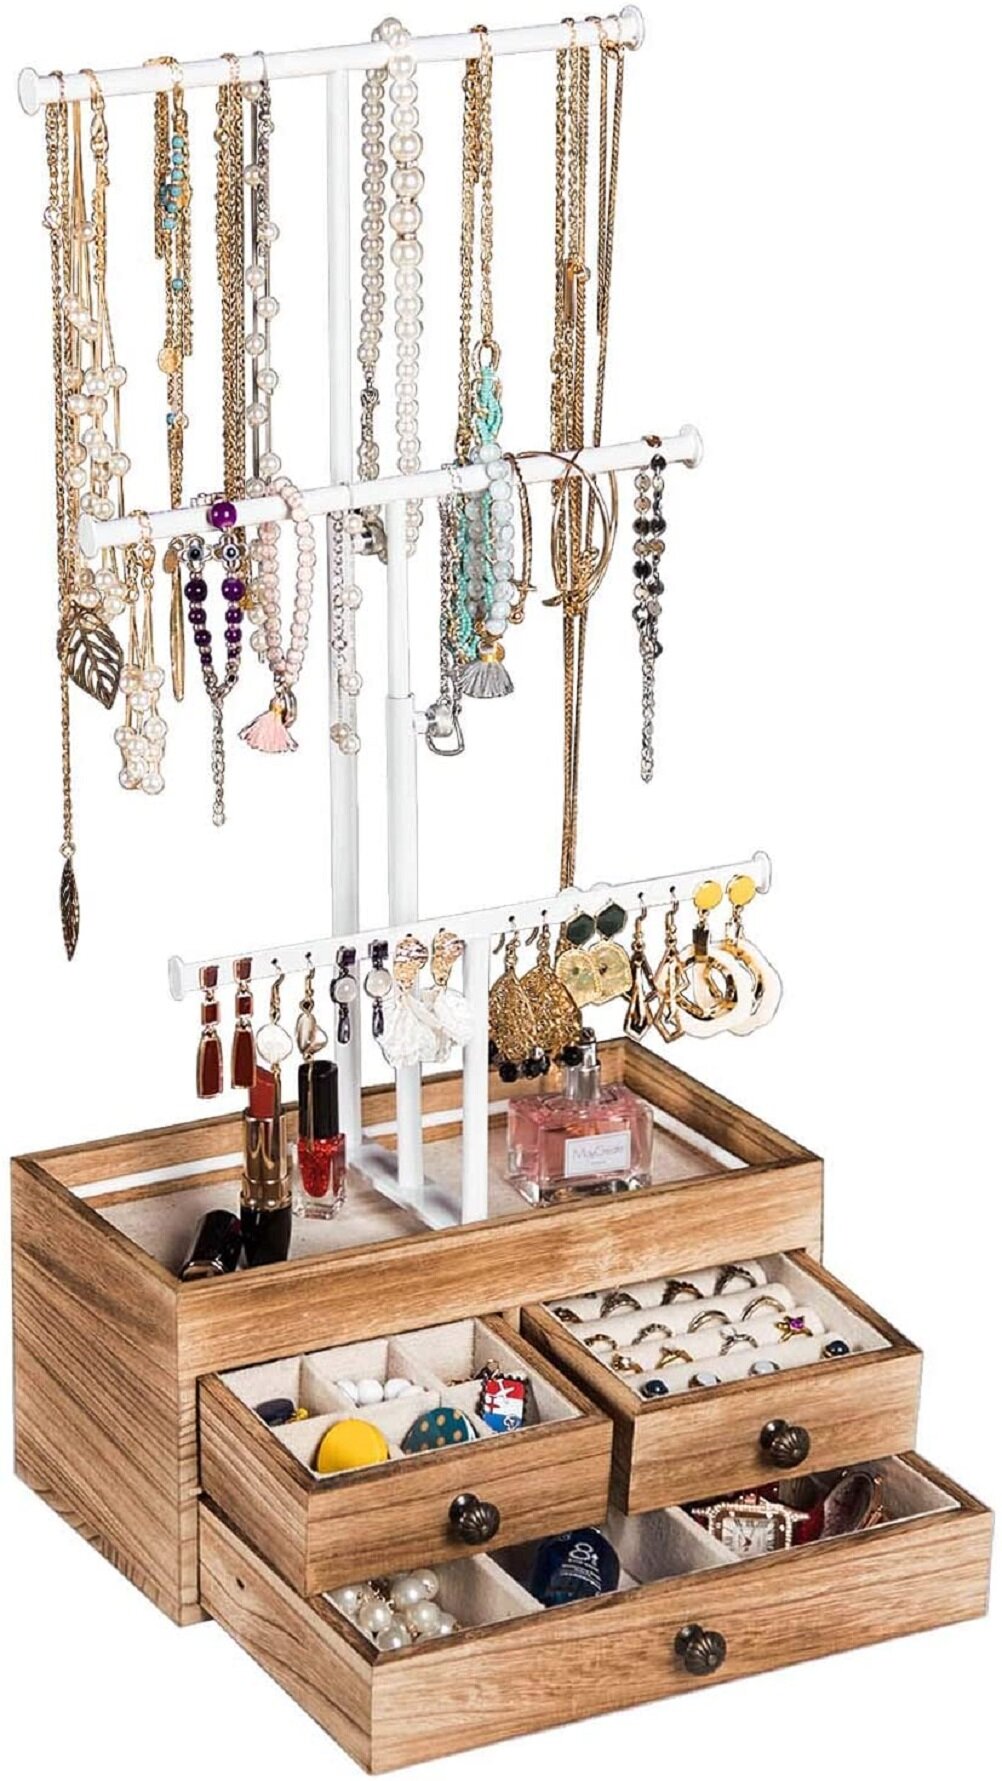 Wonderful Gift for Girls FTLL Jewelry Organizer 3 Tier Jewelry Tree Stand Metal & Wood Jewelry Storage Box Display with Adjustable Height for Necklaces Bracelet Earrings and Ring 